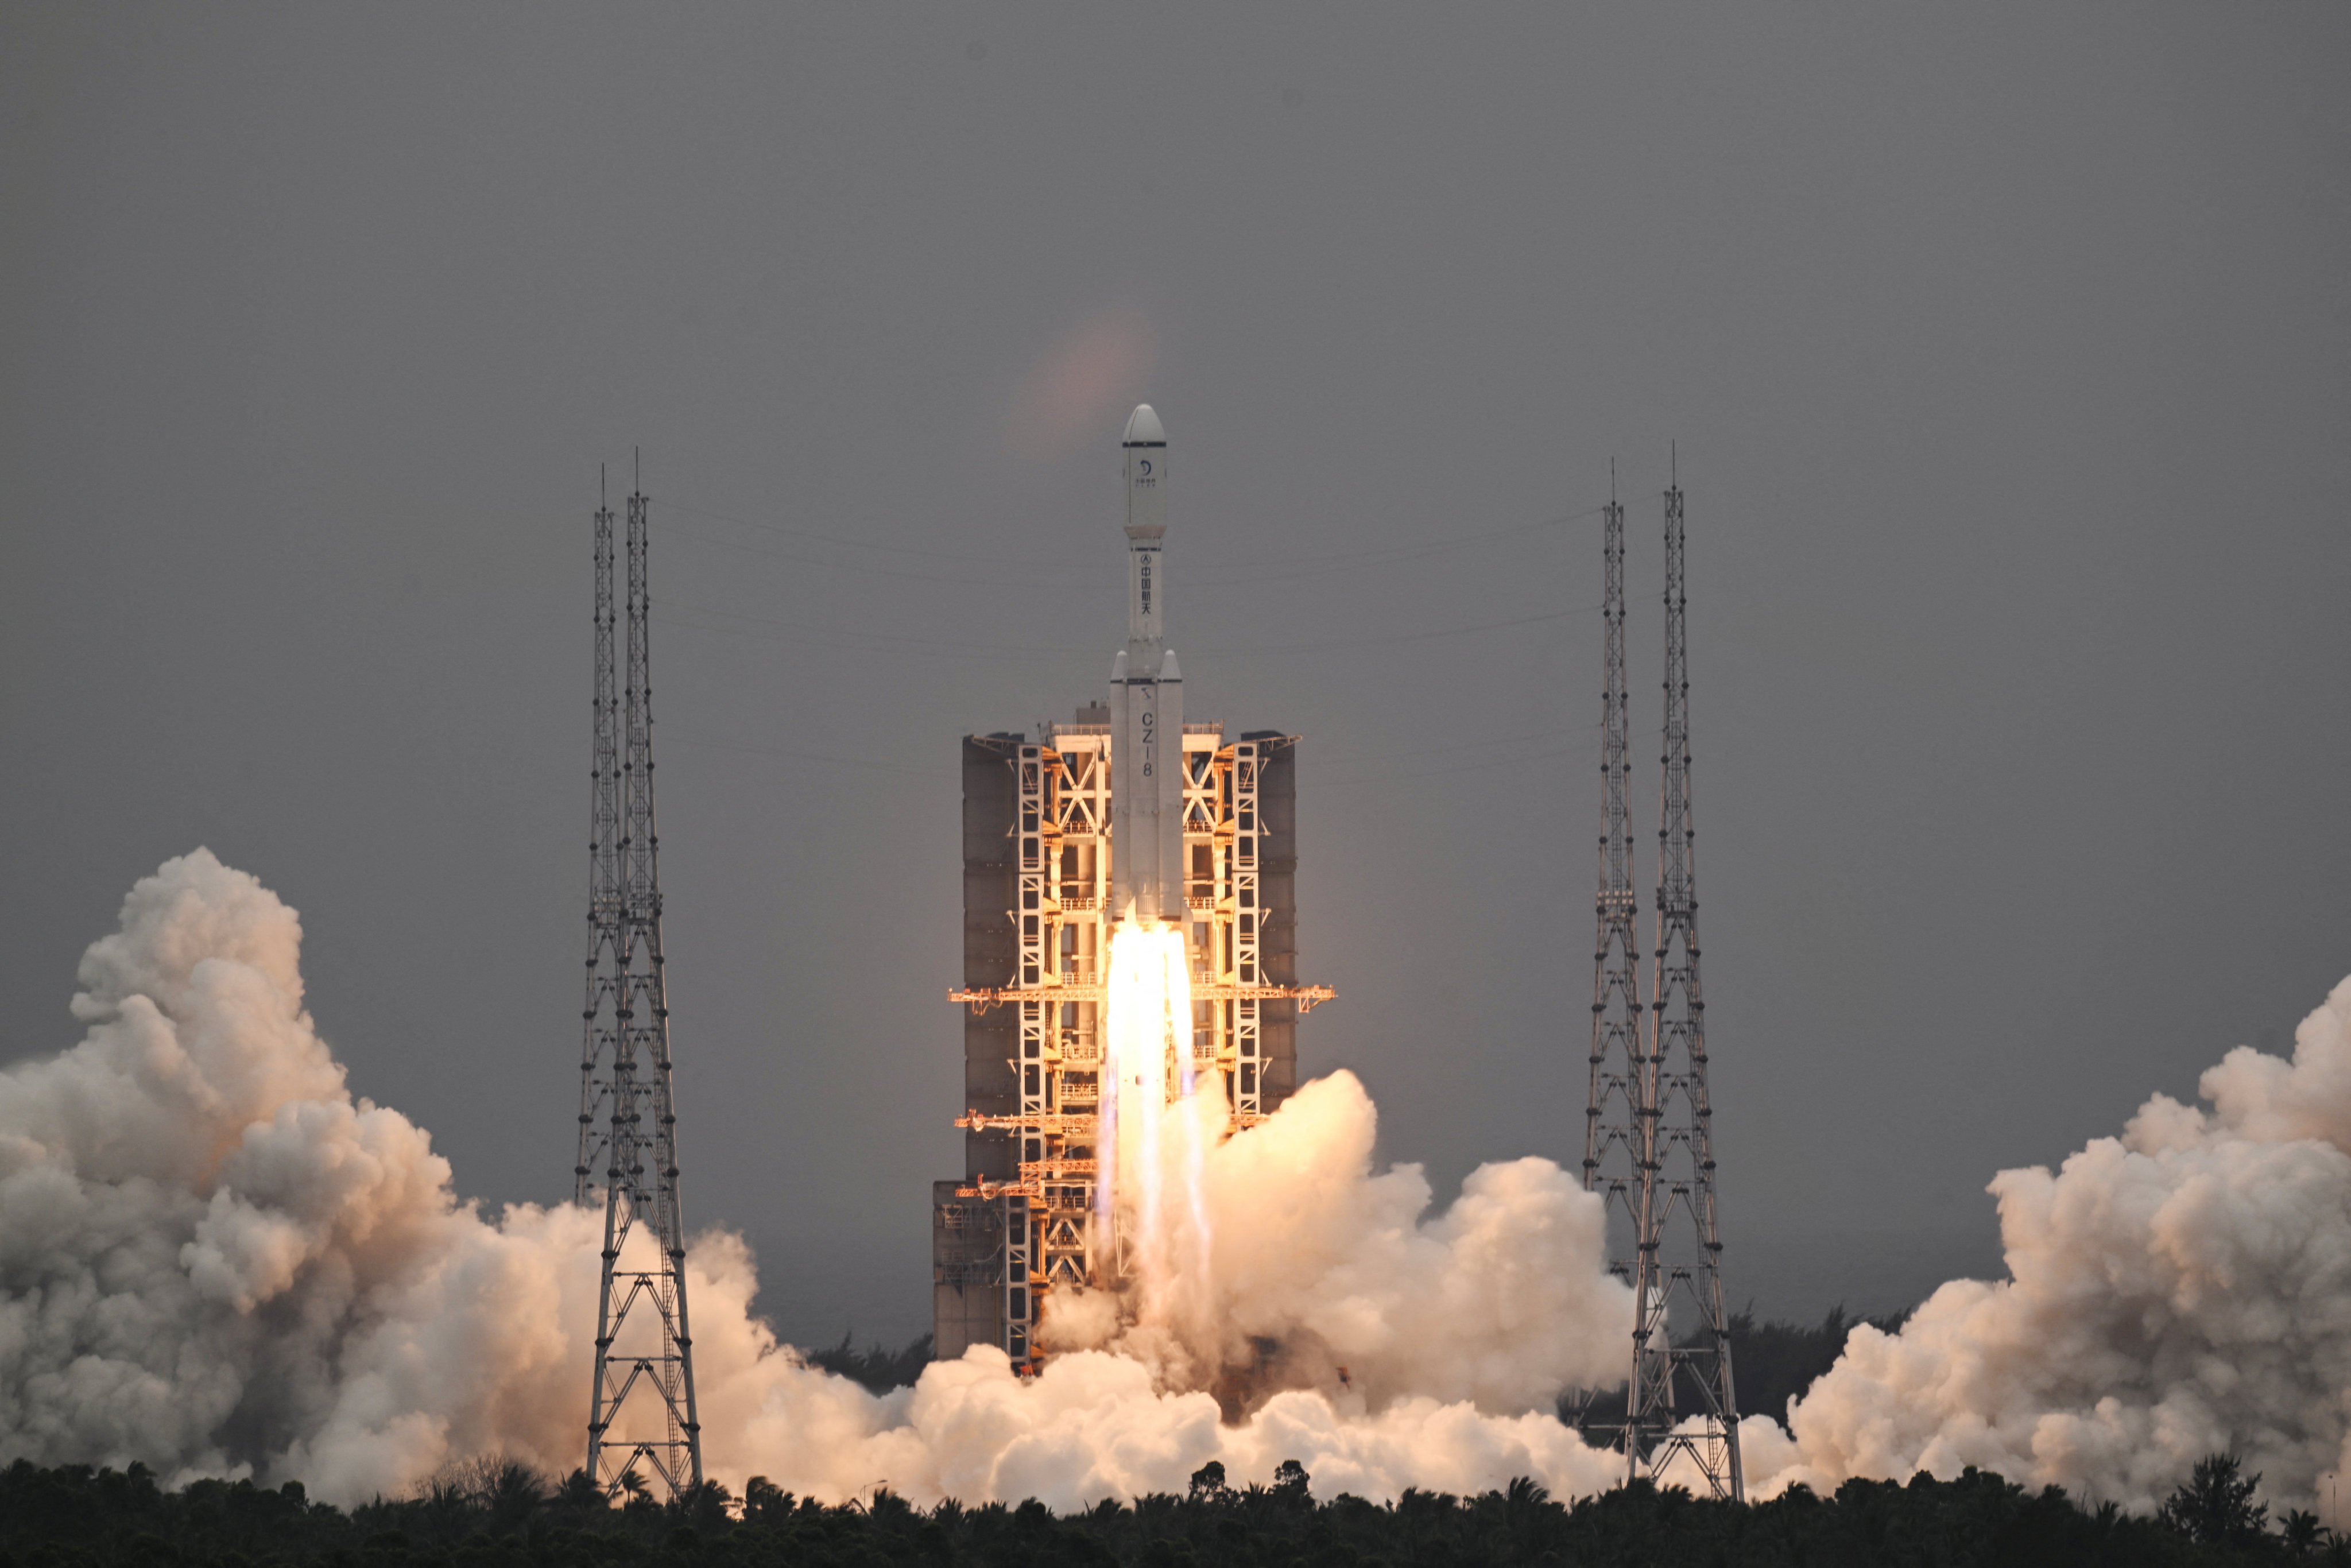 A Long March-8 rocket, carrying the relay satellite Queqiao-2 for Earth-moon communications, blasts off at the Wenchang Space Launch Centre on March 20. Photo: Reuters